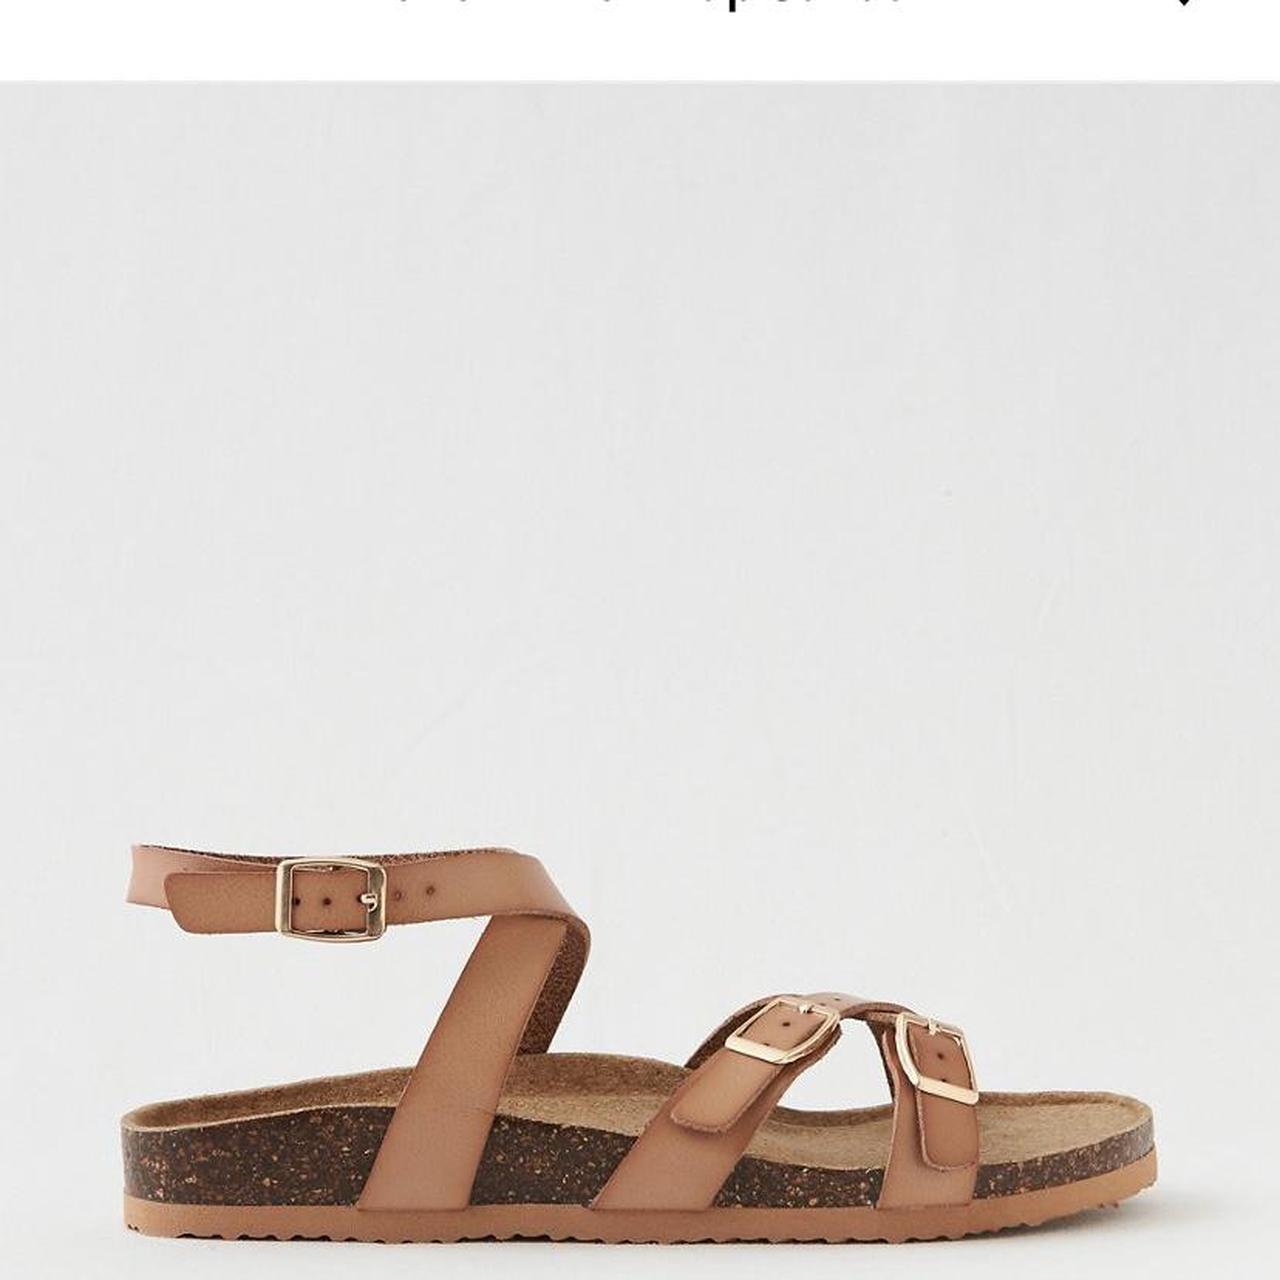 Aerie Women's Tan and Brown Sandals